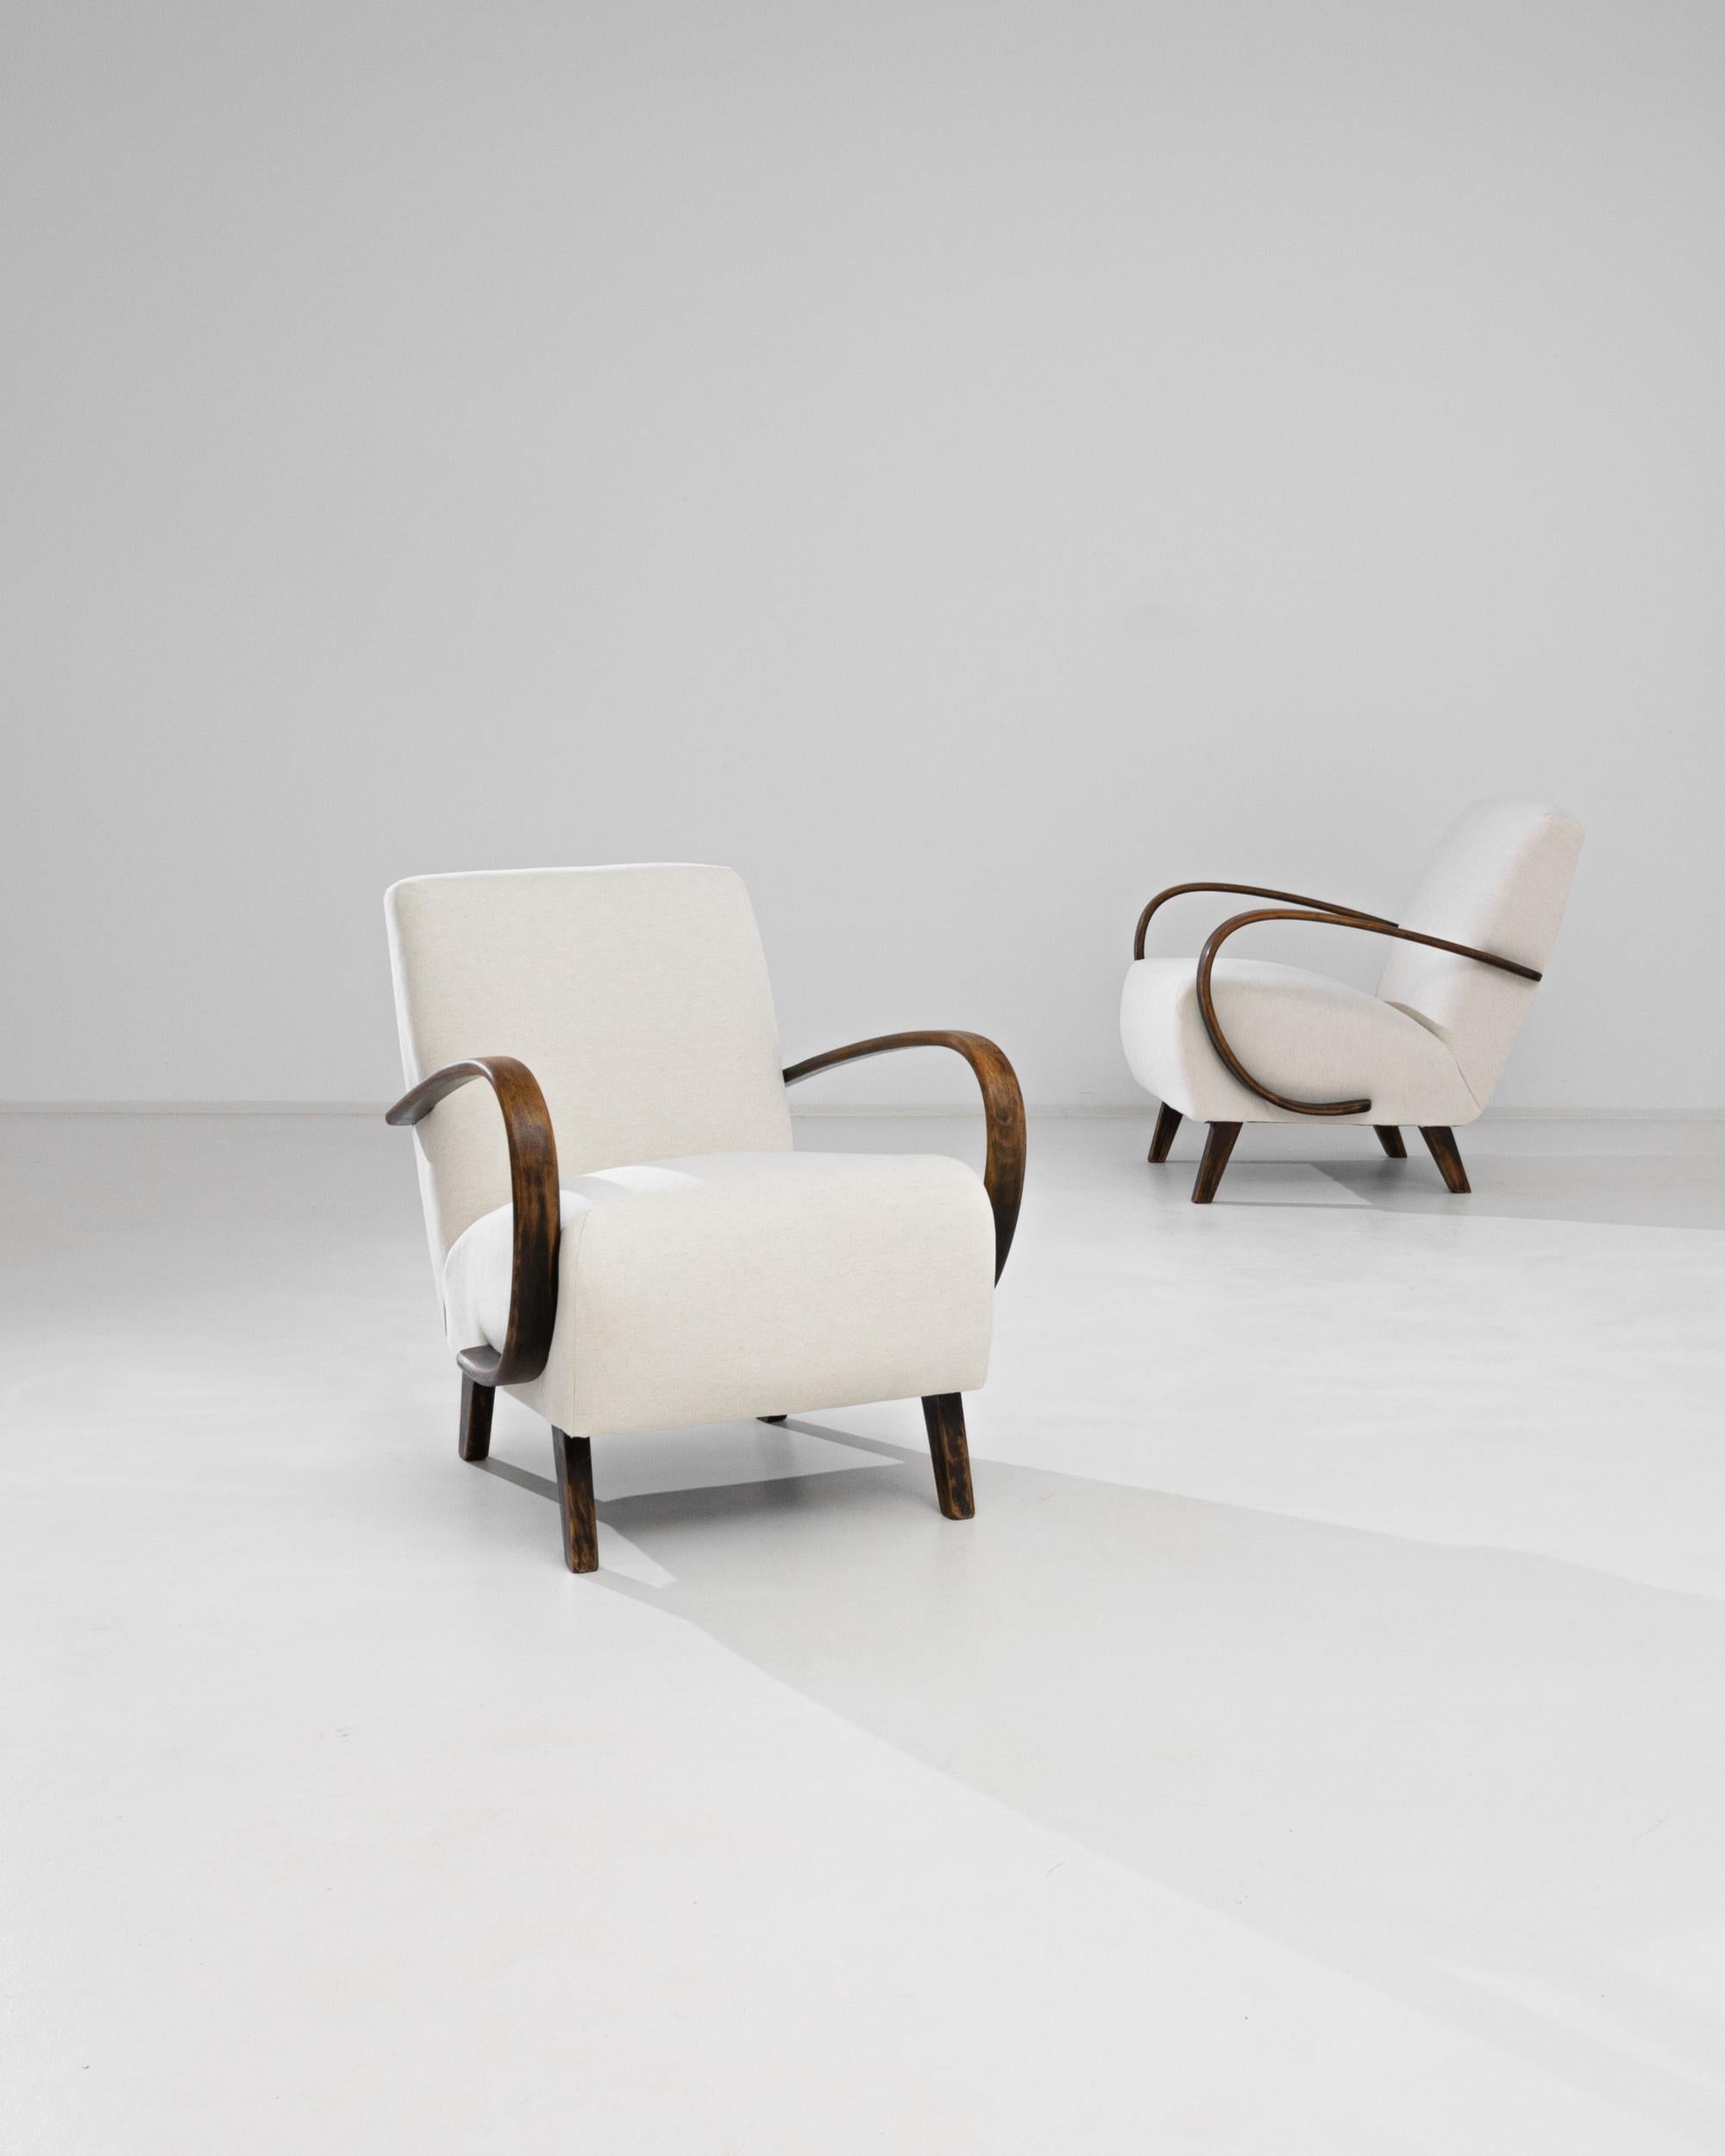 A pair of armchairs by Czech furniture designer J. Halabala. Made in the 1950s, variations on bentwood furniture were produced in Central European furniture factories throughout the 20th Century. The eye-catching silhouette and comfortable shape has